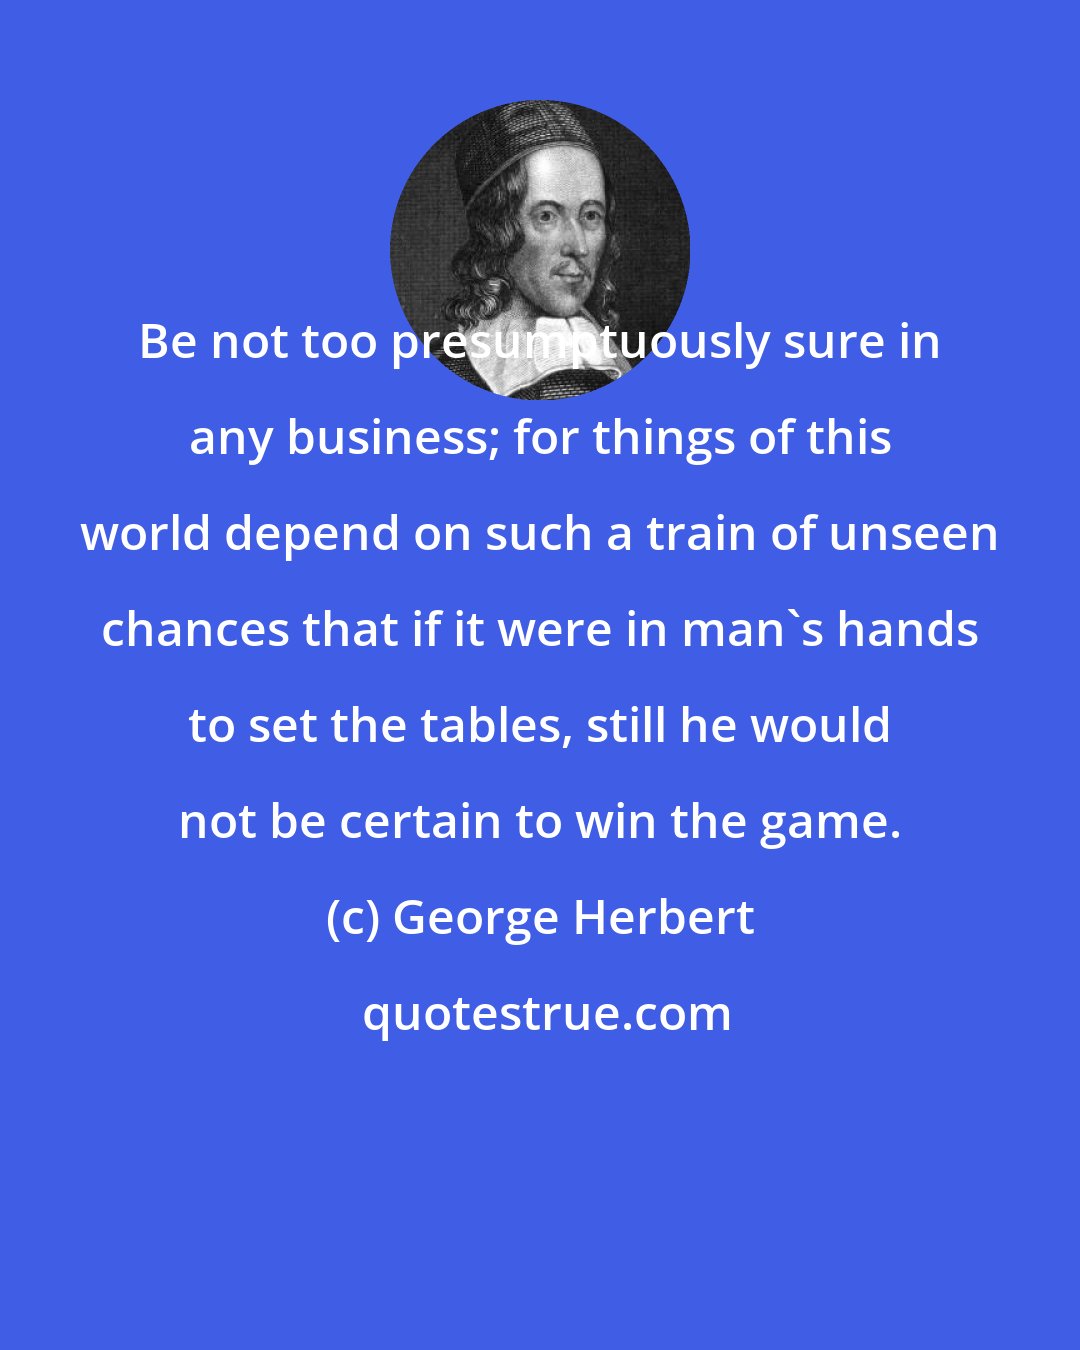 George Herbert: Be not too presumptuously sure in any business; for things of this world depend on such a train of unseen chances that if it were in man's hands to set the tables, still he would not be certain to win the game.